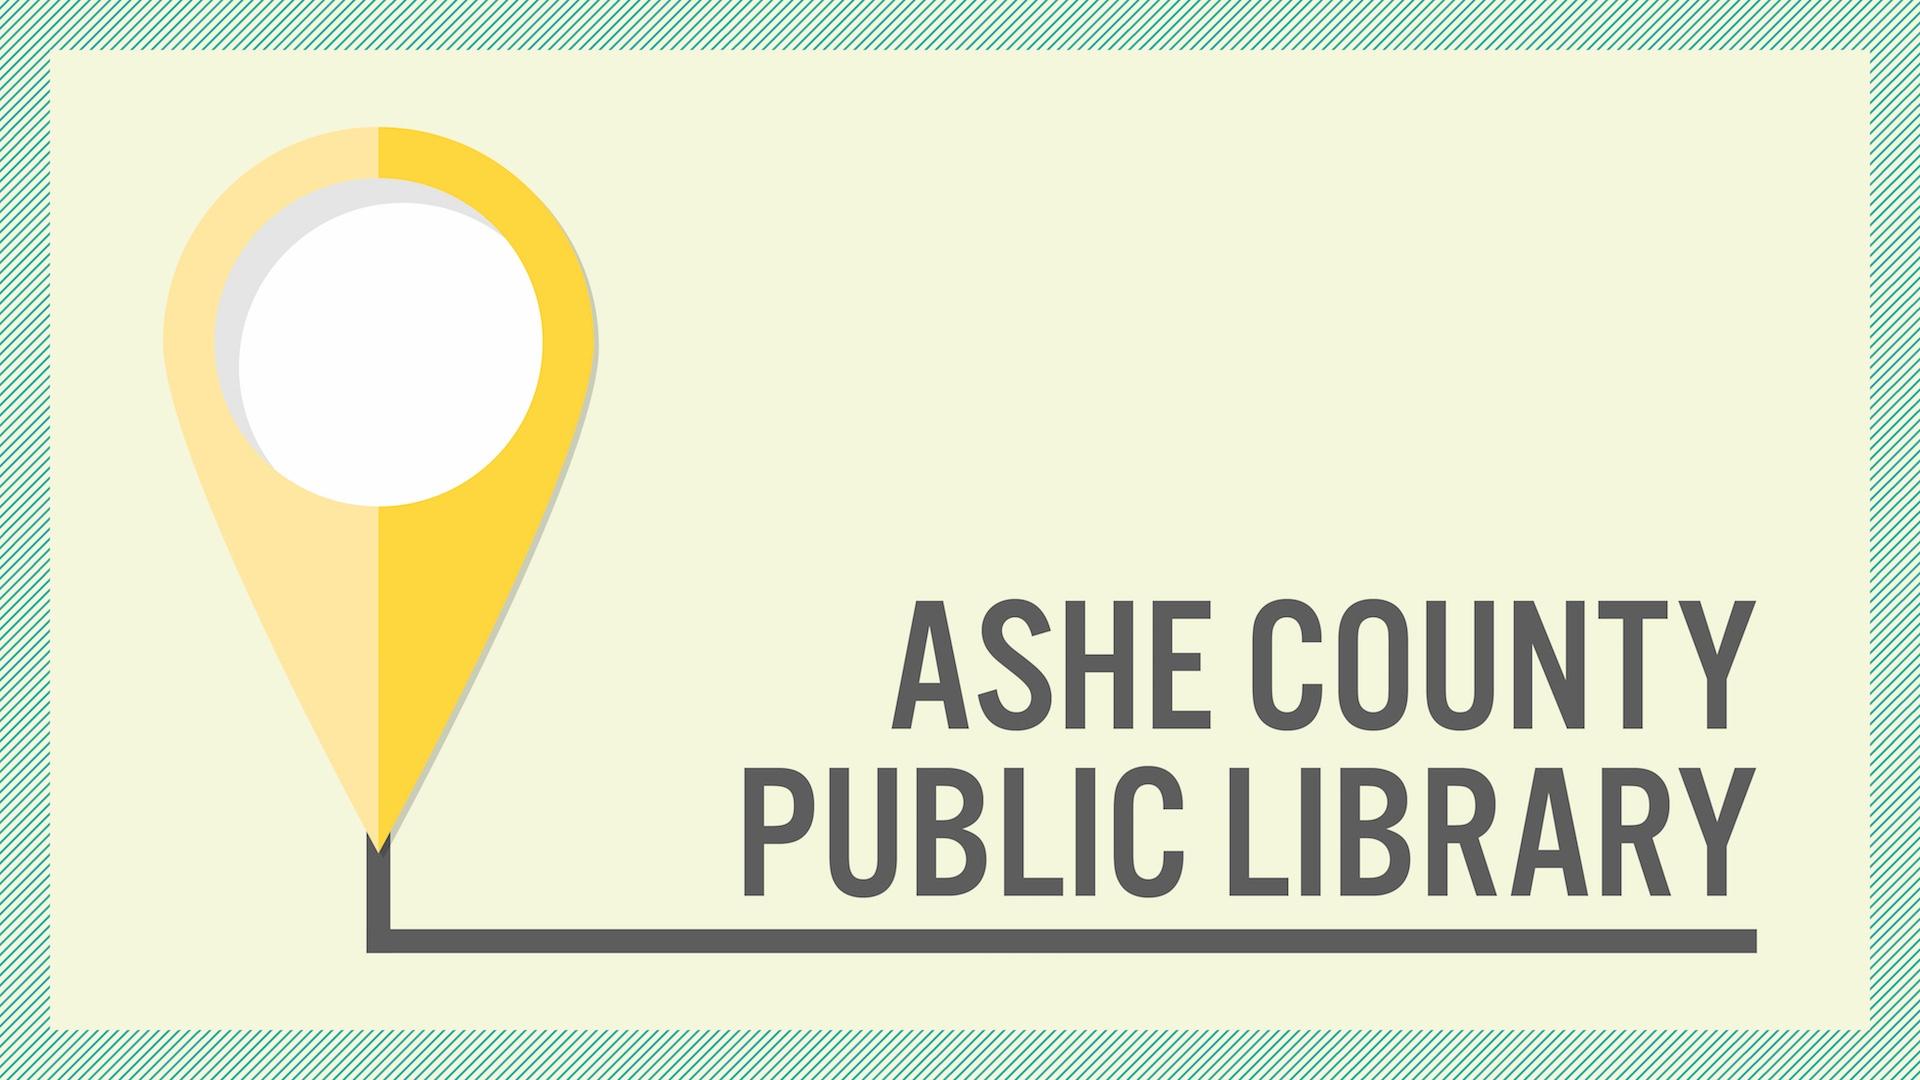 Ashe County Public Library